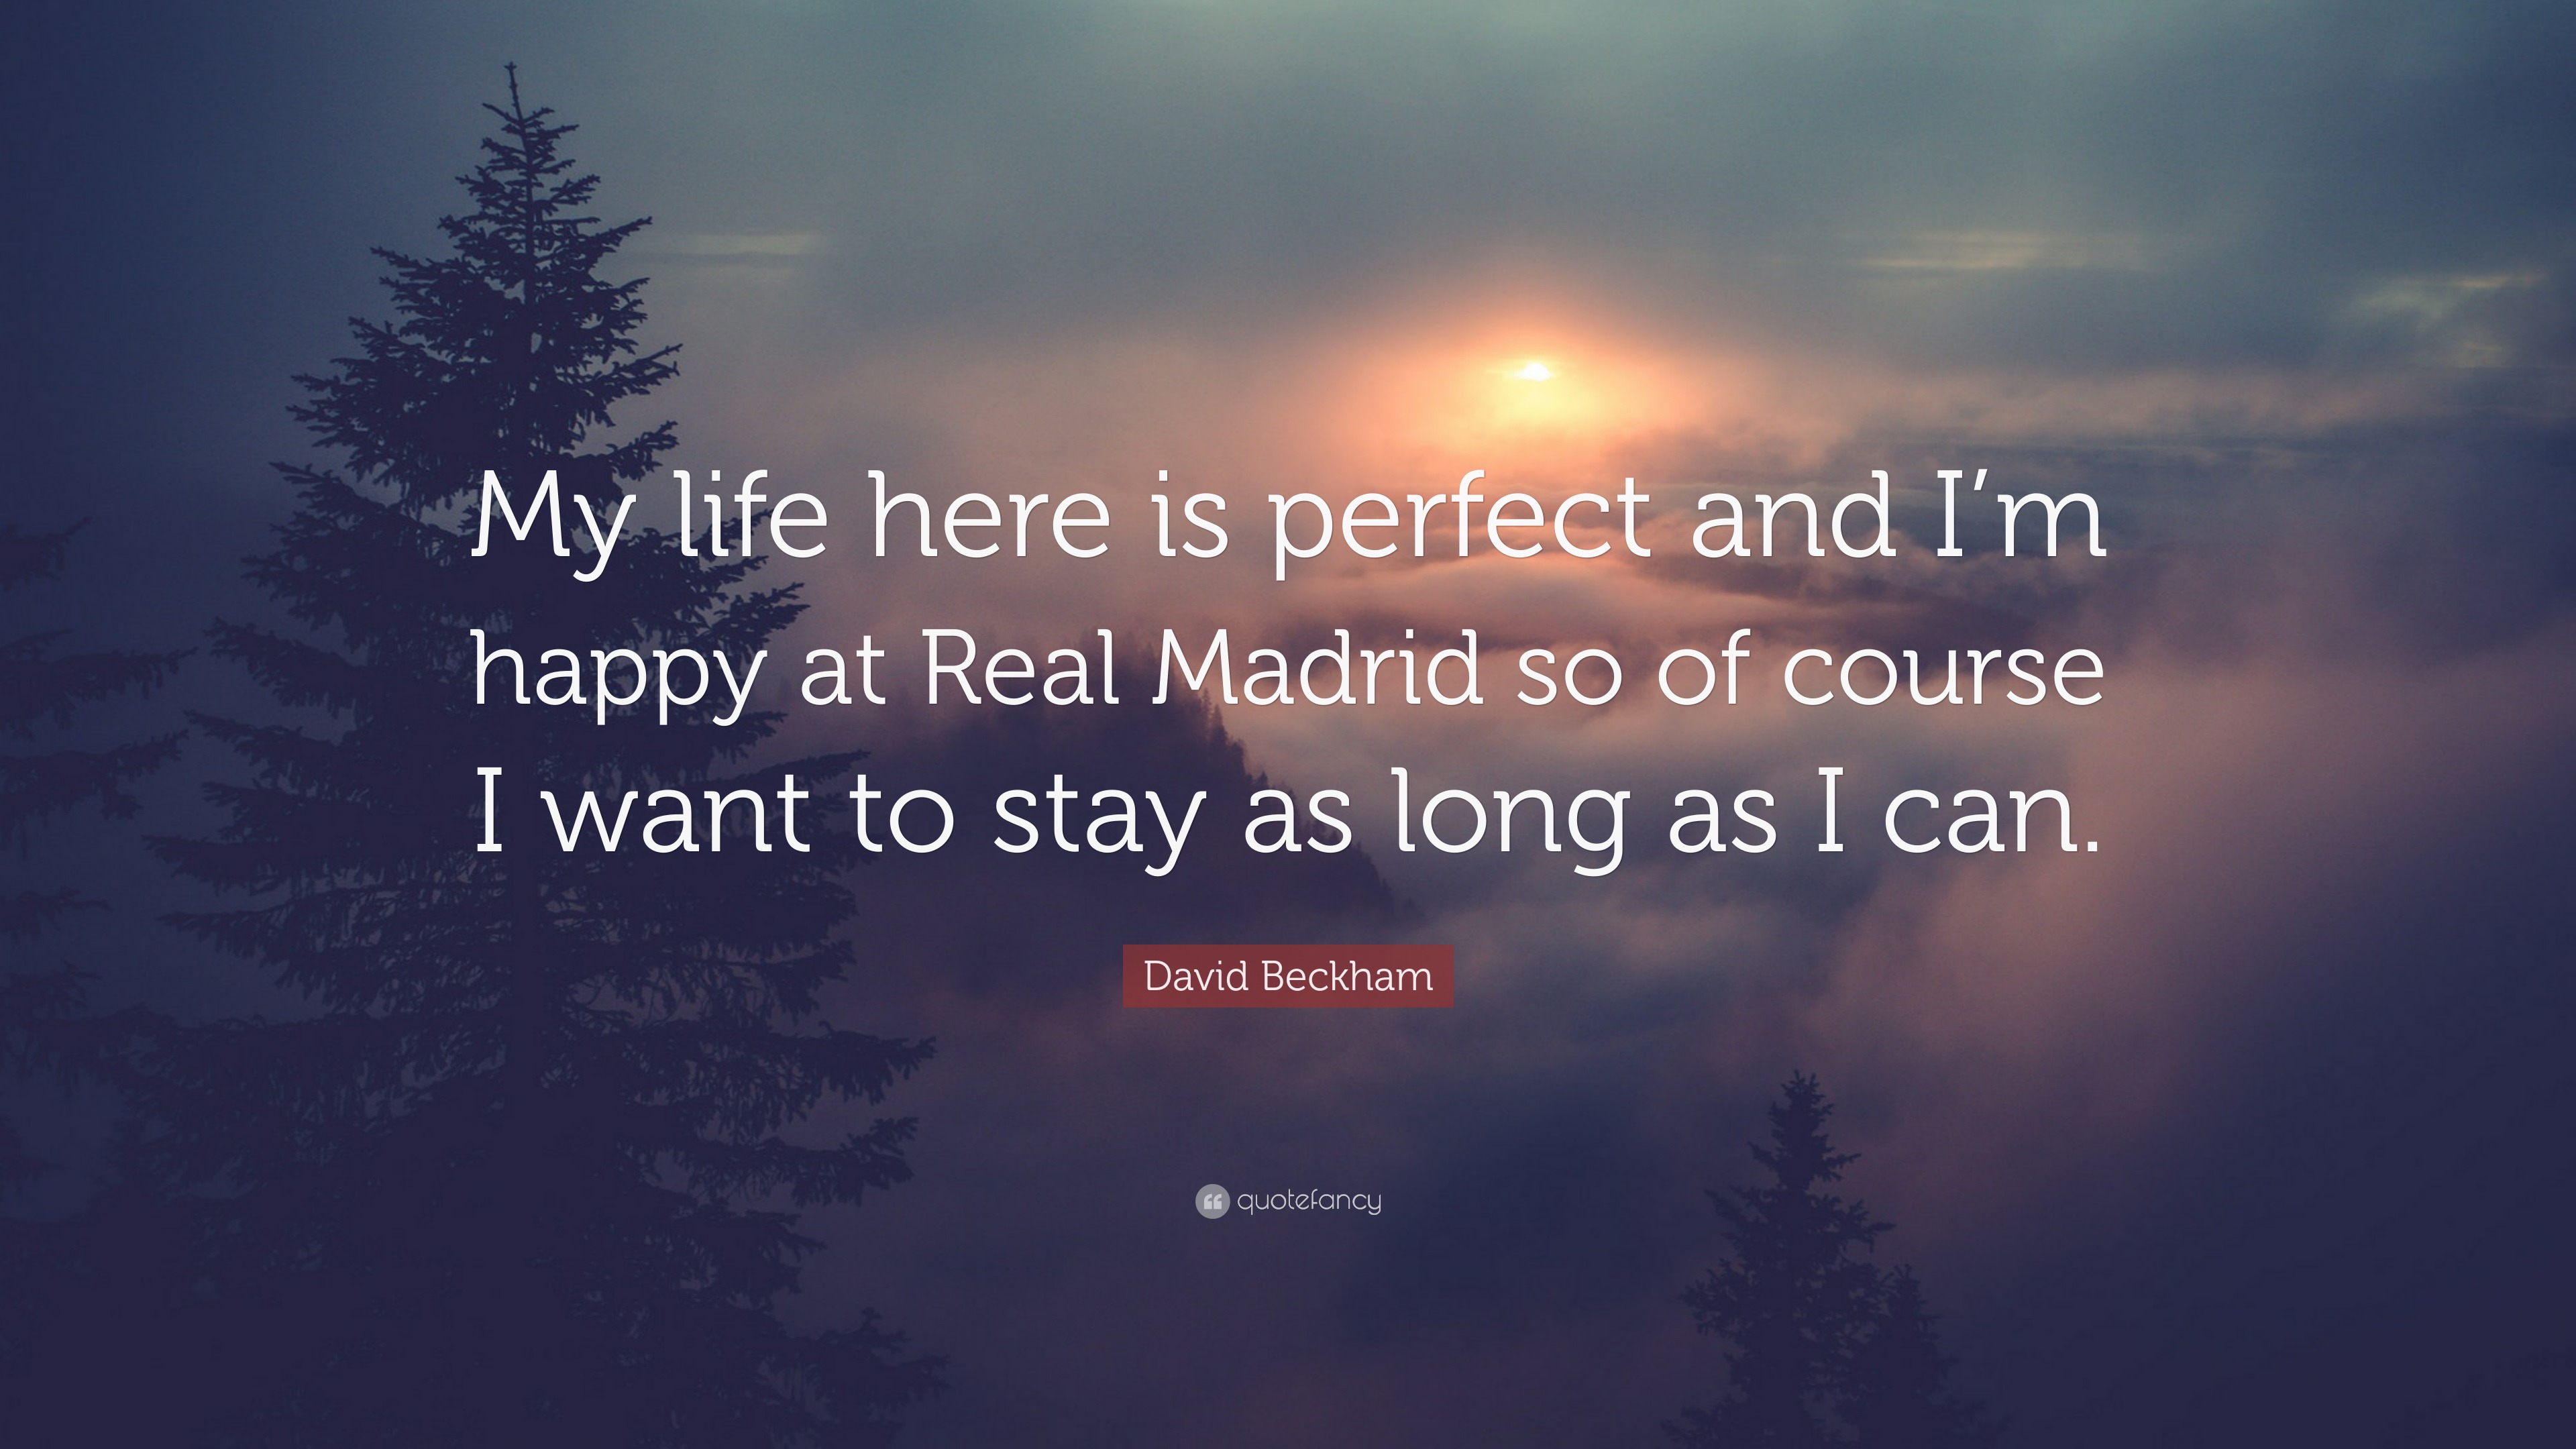 David Beckham Quote “My life here is perfect and I m happy at